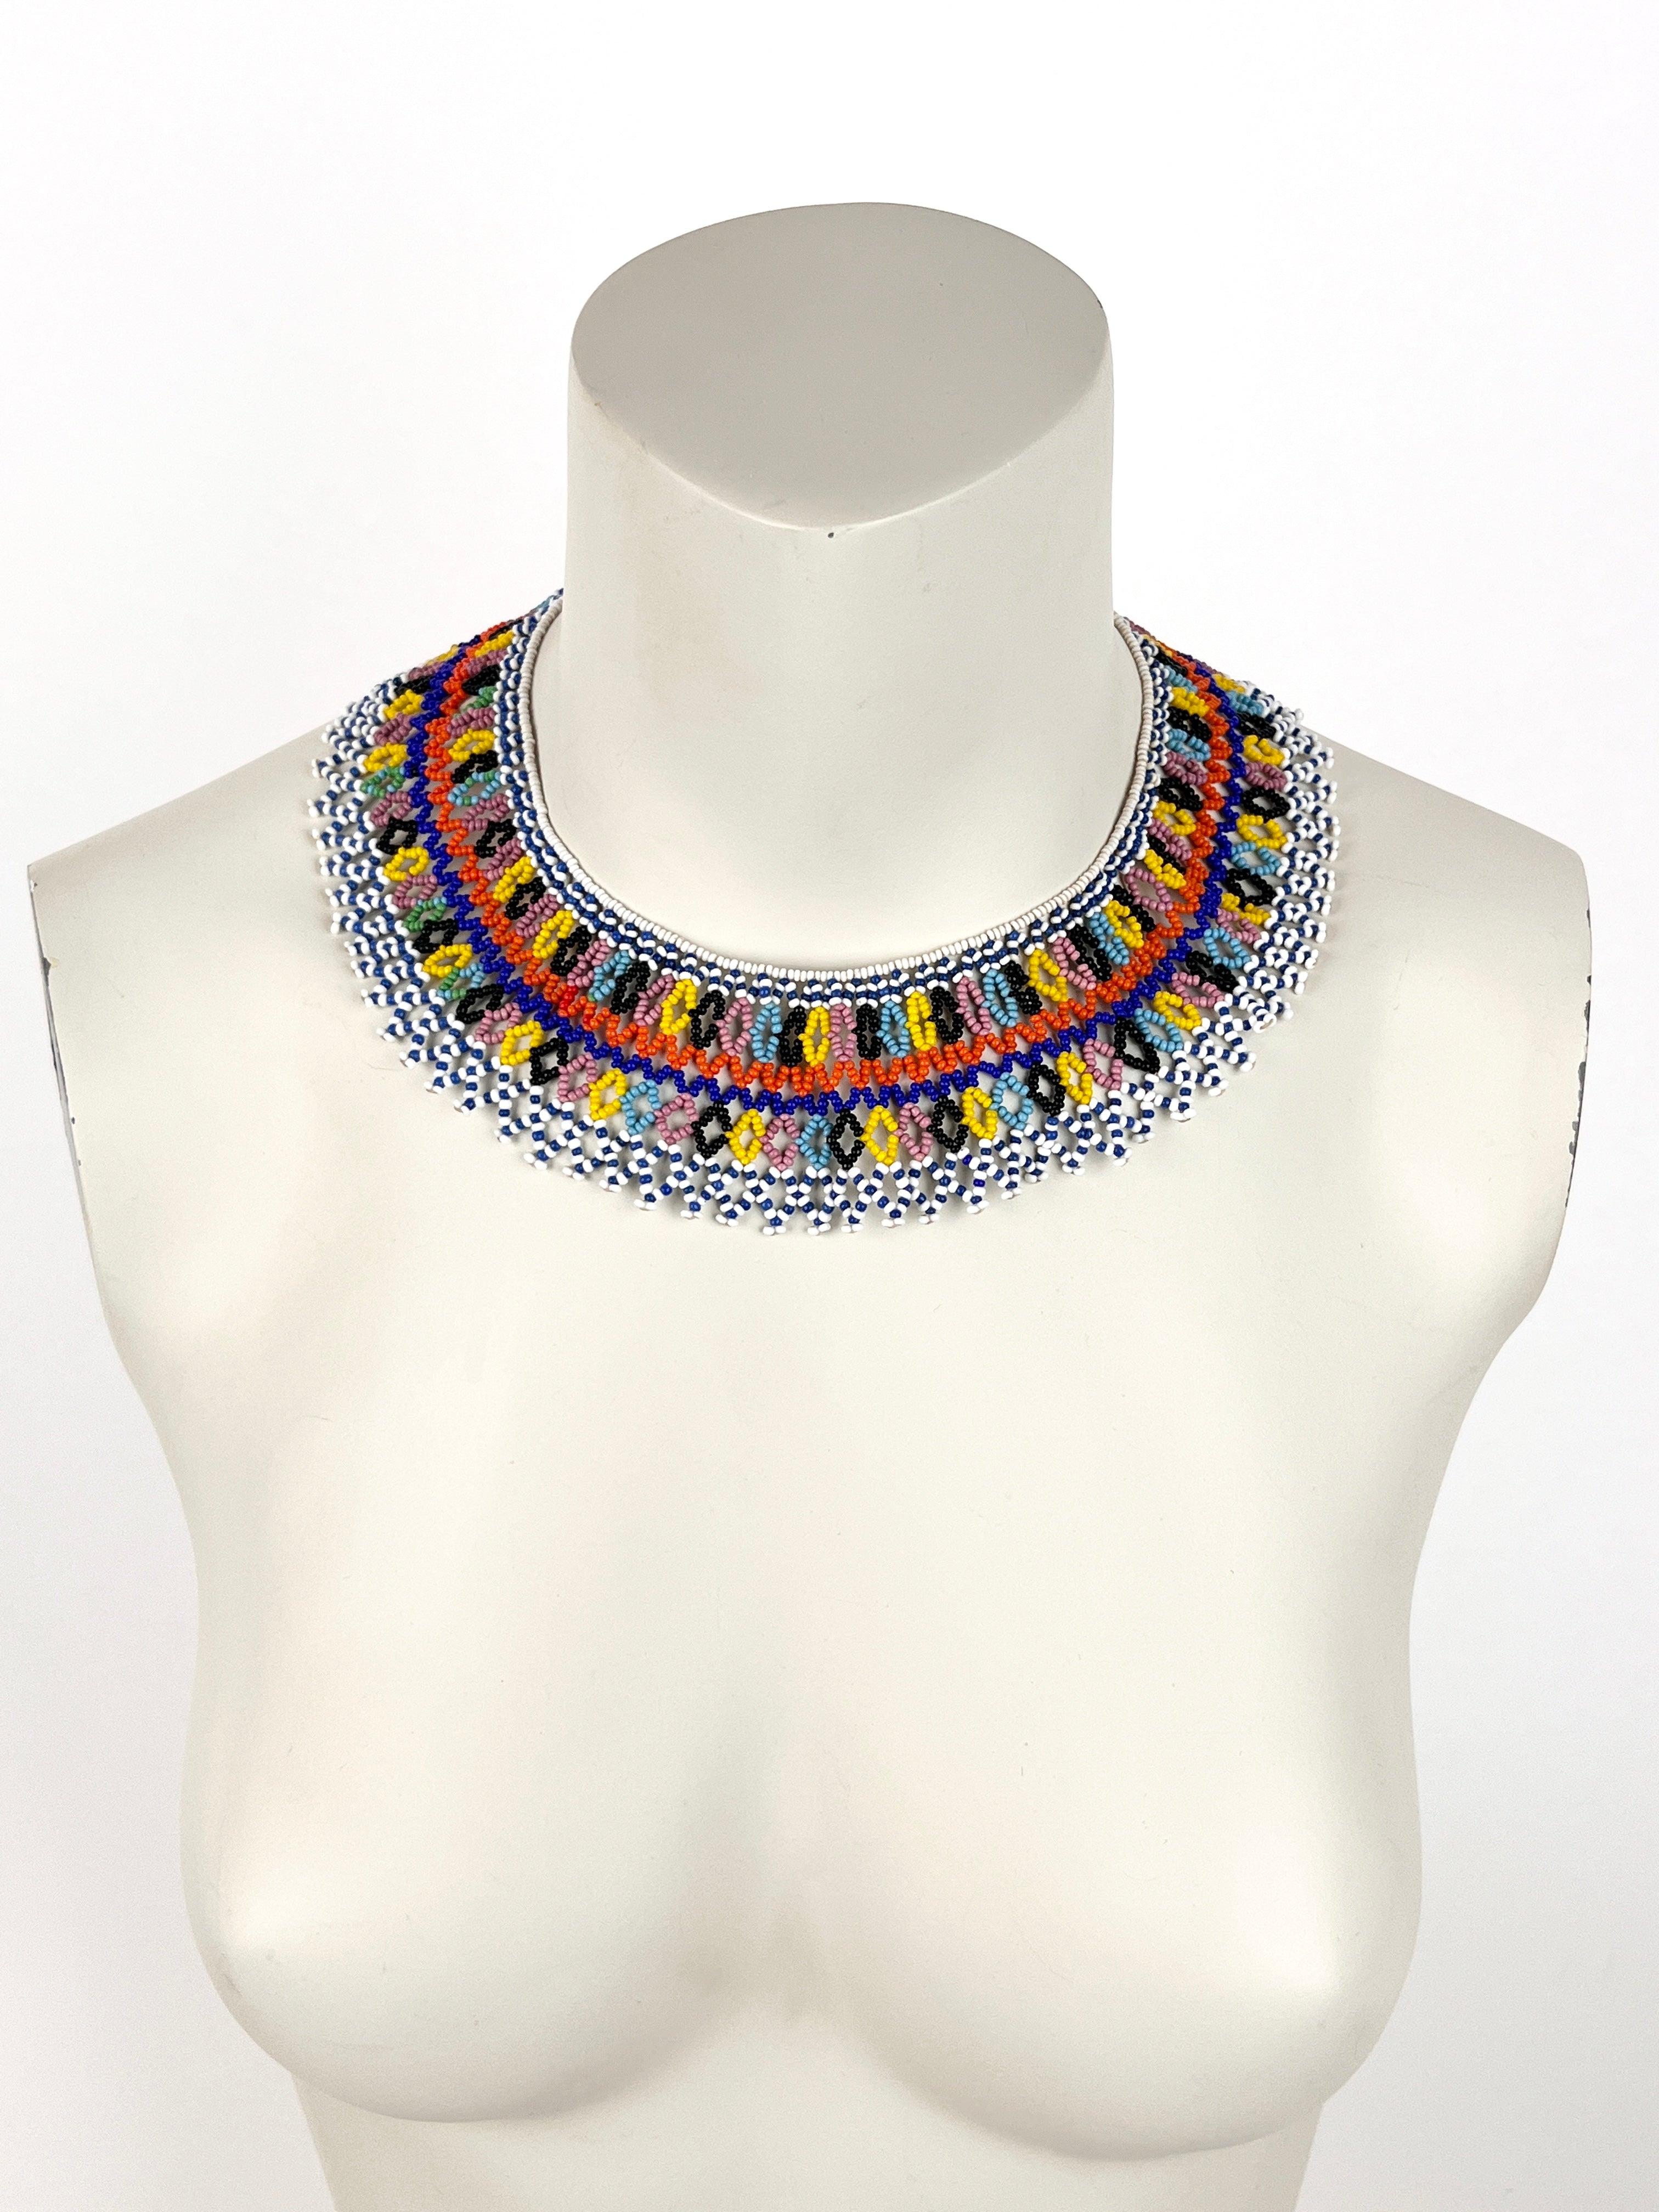 Women's Silver and Multicolor Beaded Collar Necklace... - Depop